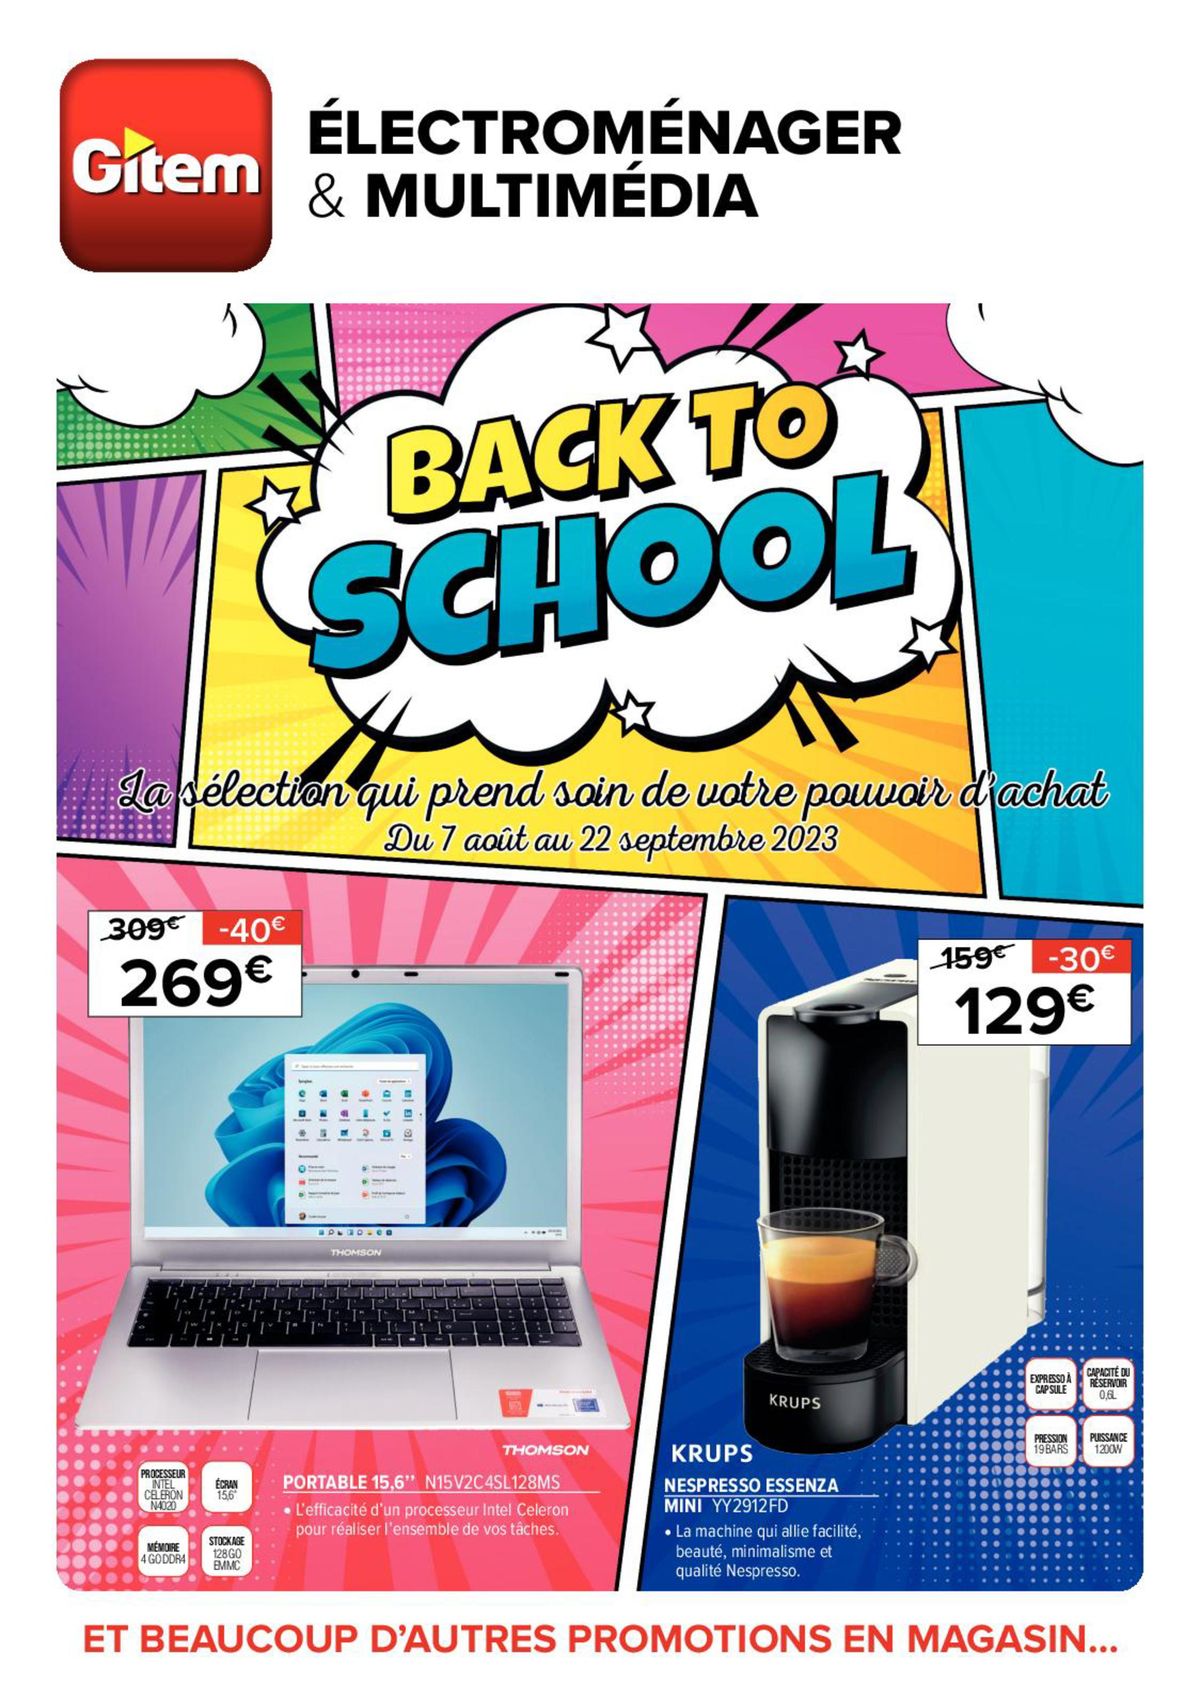 Catalogue Back to school !, page 00001